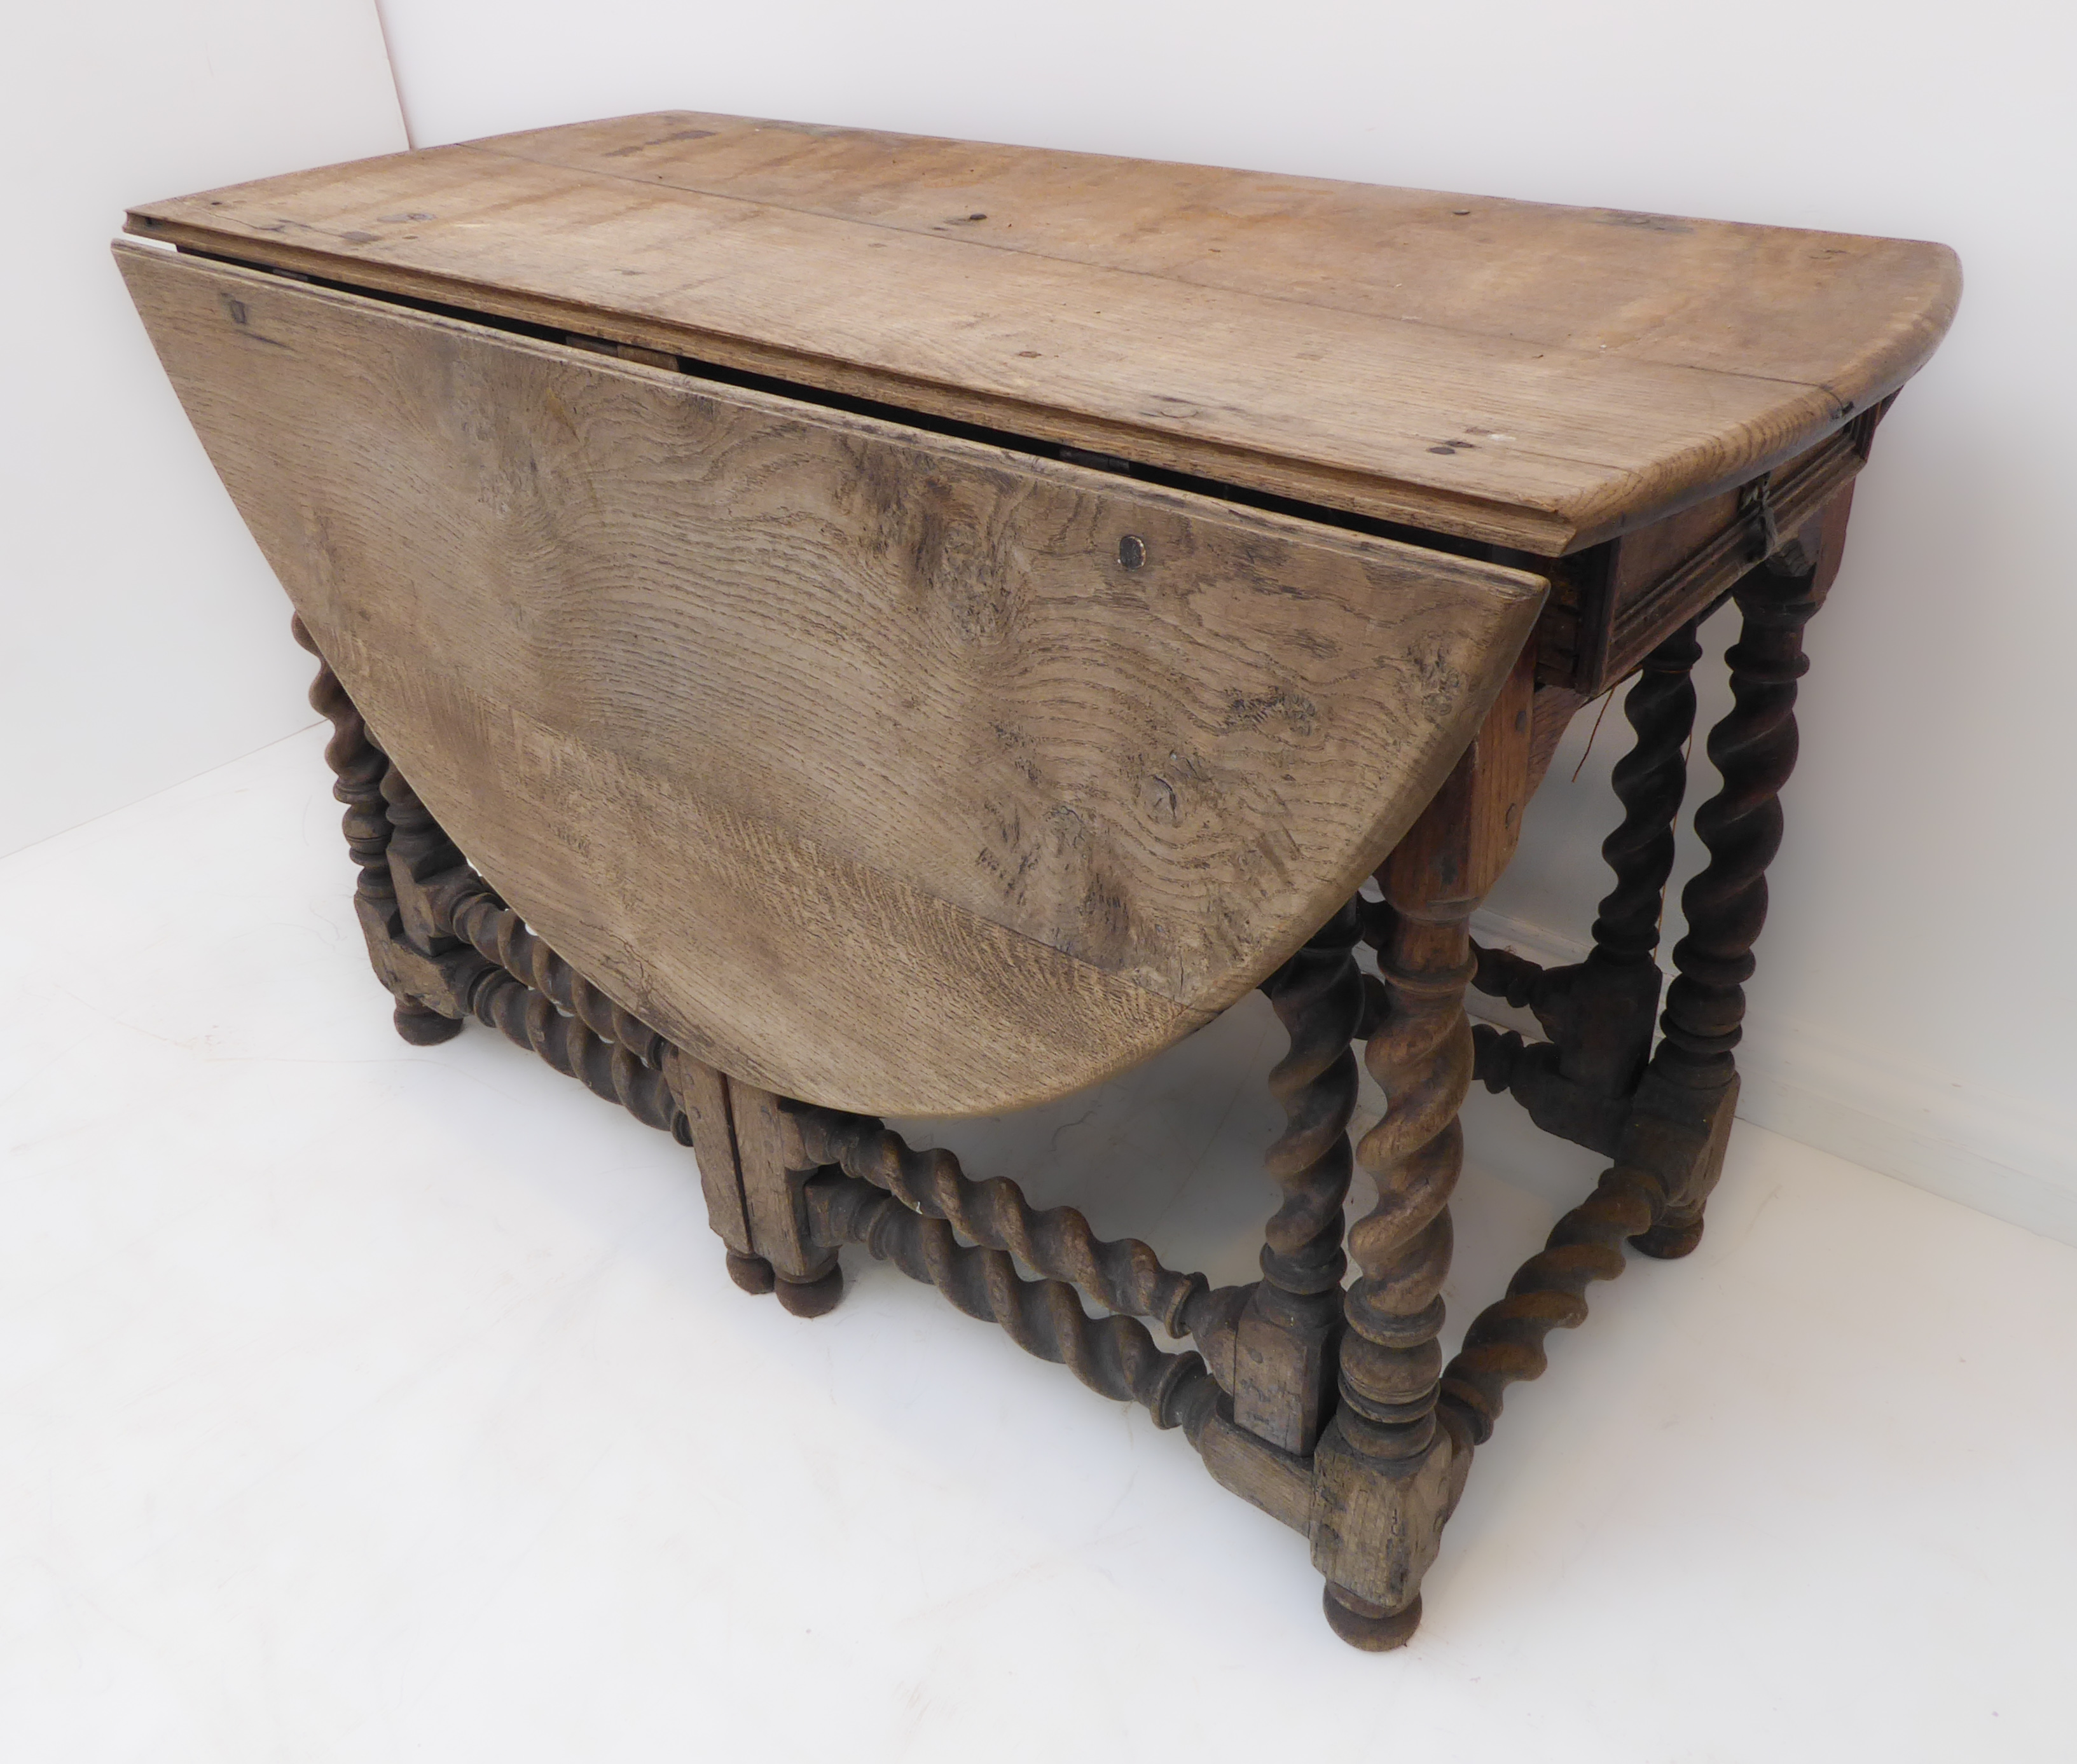 A large oval-topped double-gateleg drop-leaf table with single end-drawer; probably late 17th or